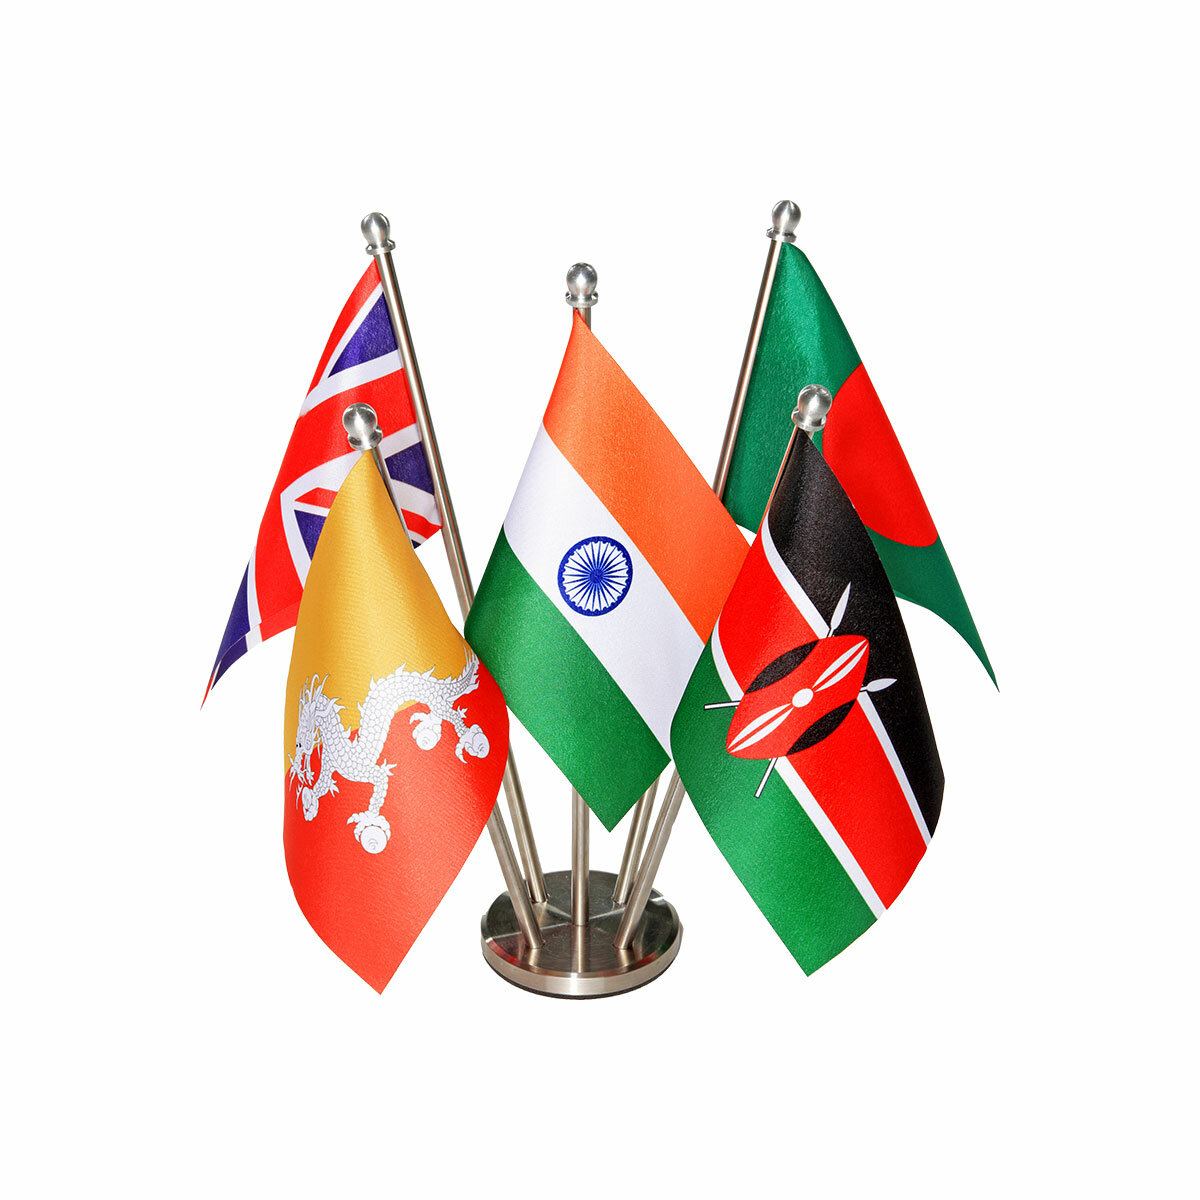 indian flag & other national flags together on a stainless steel stand